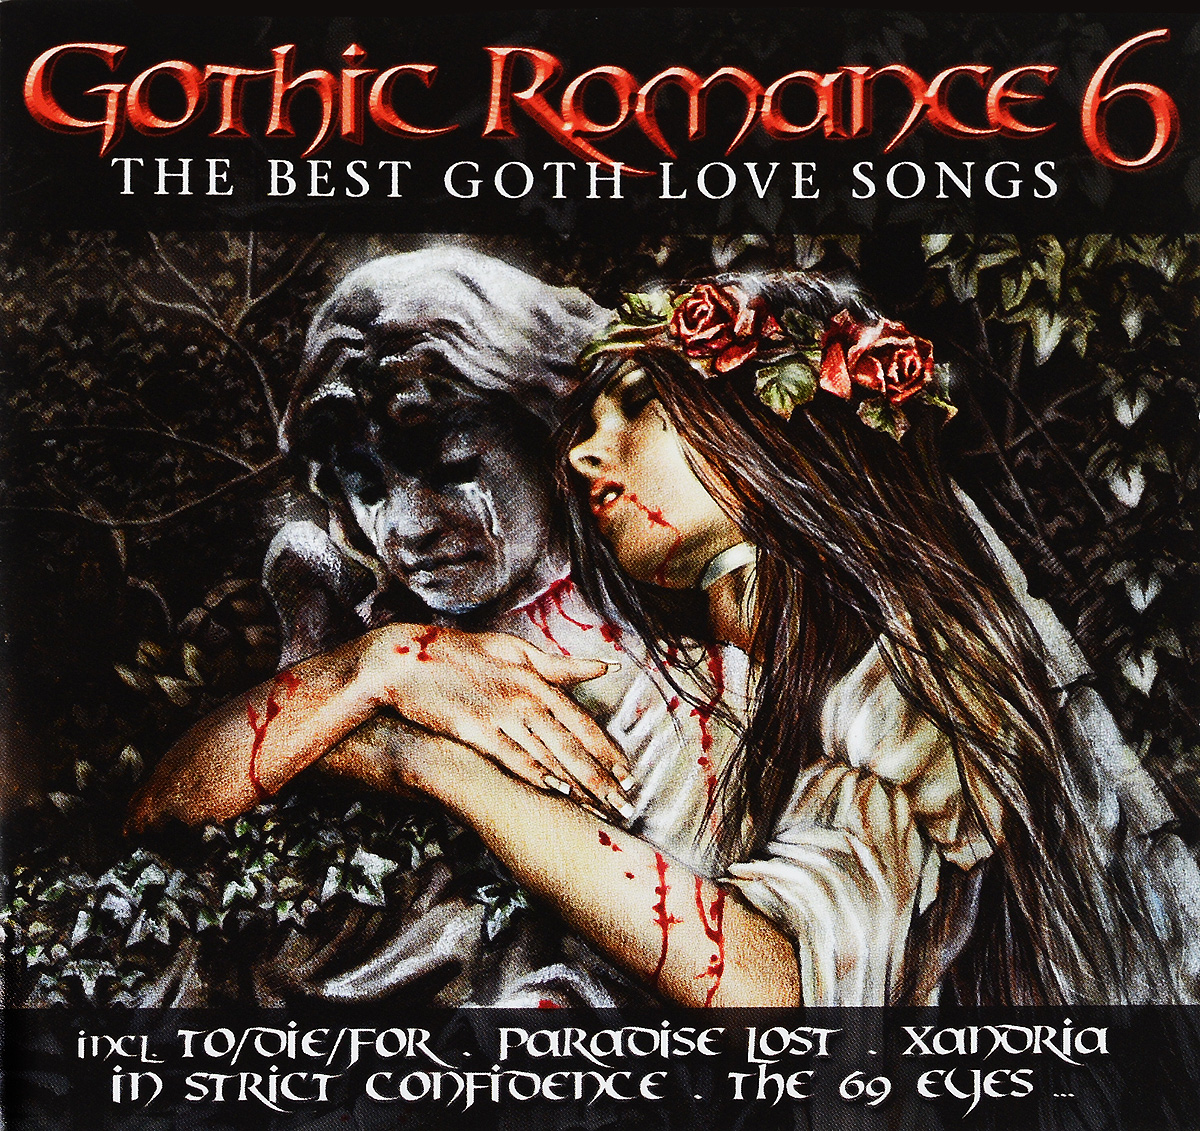 Gothic Romance 6. The Best Goth Love Songs (2 CD)